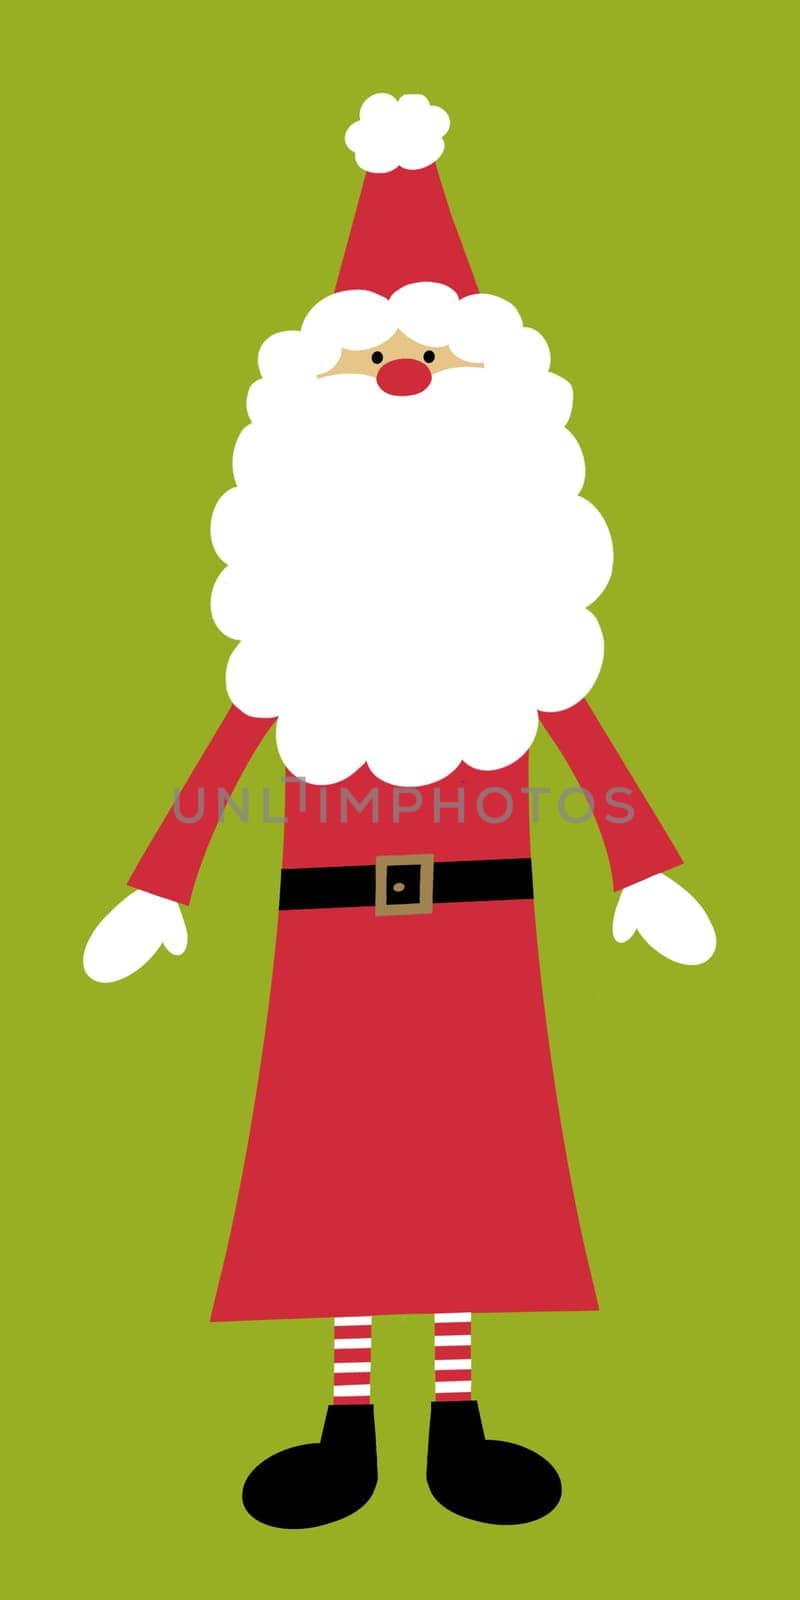 Illustration of a fun quirky Santa with a big bushy beard, on a lime green background. Quirky Father Christmas. Father Christmas with striped socks. Santa with stripy socks.  Cartoon style Christmas illustration.